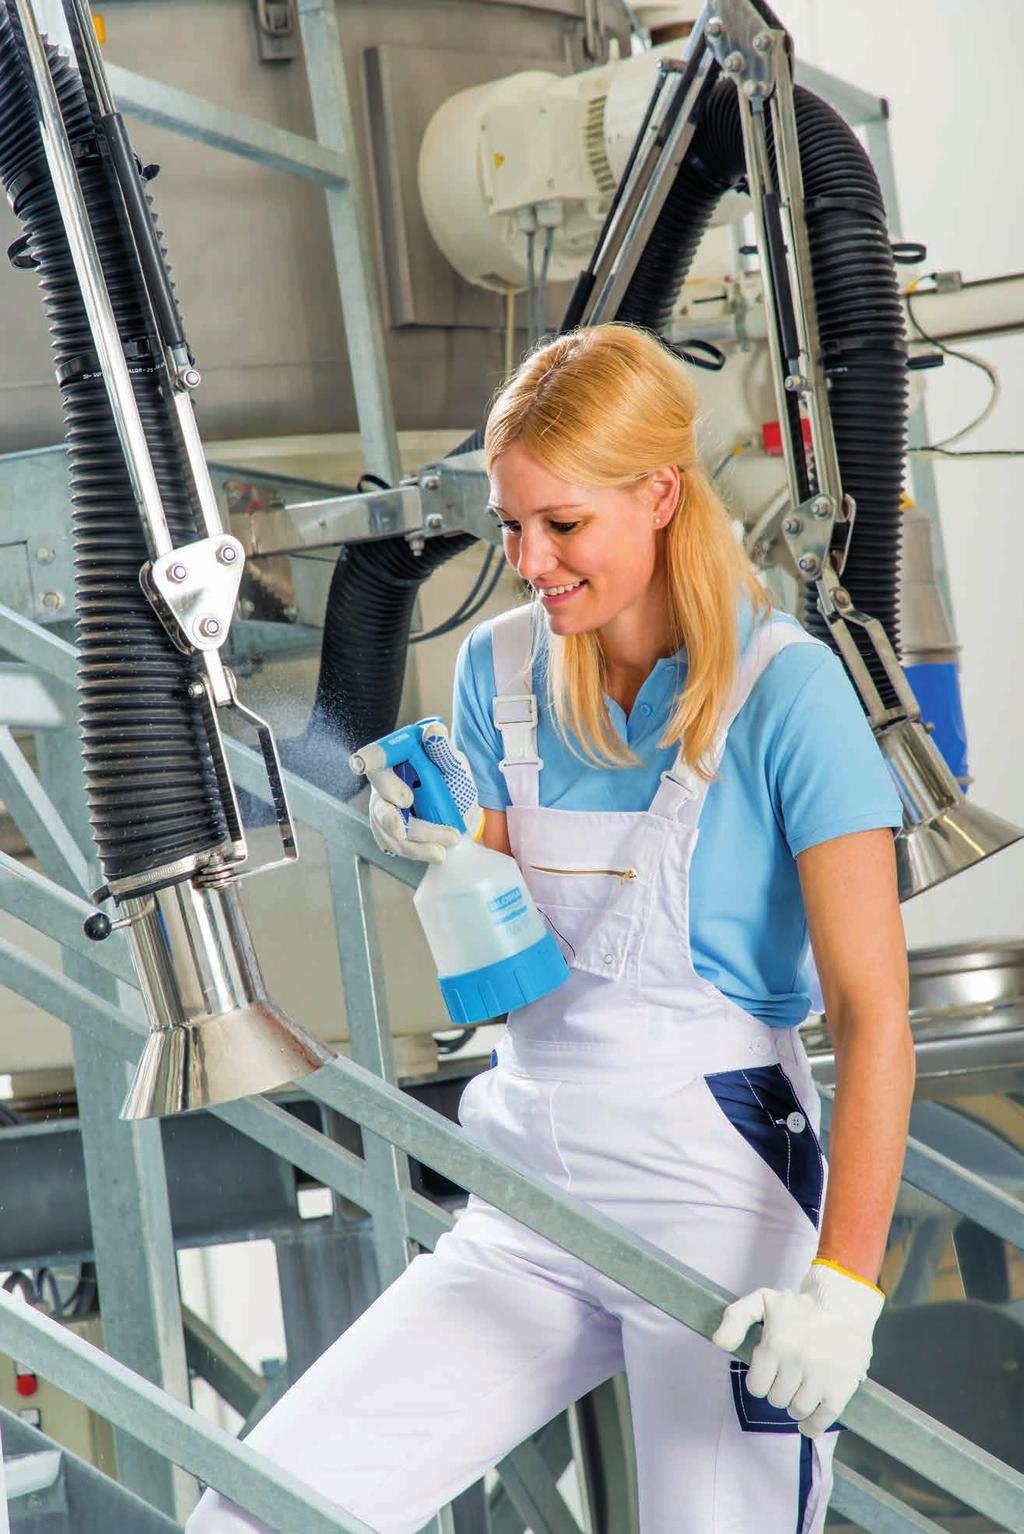 The versatile CleanMaster range is complemented by the three robust hand sprayers of the Extreme series.